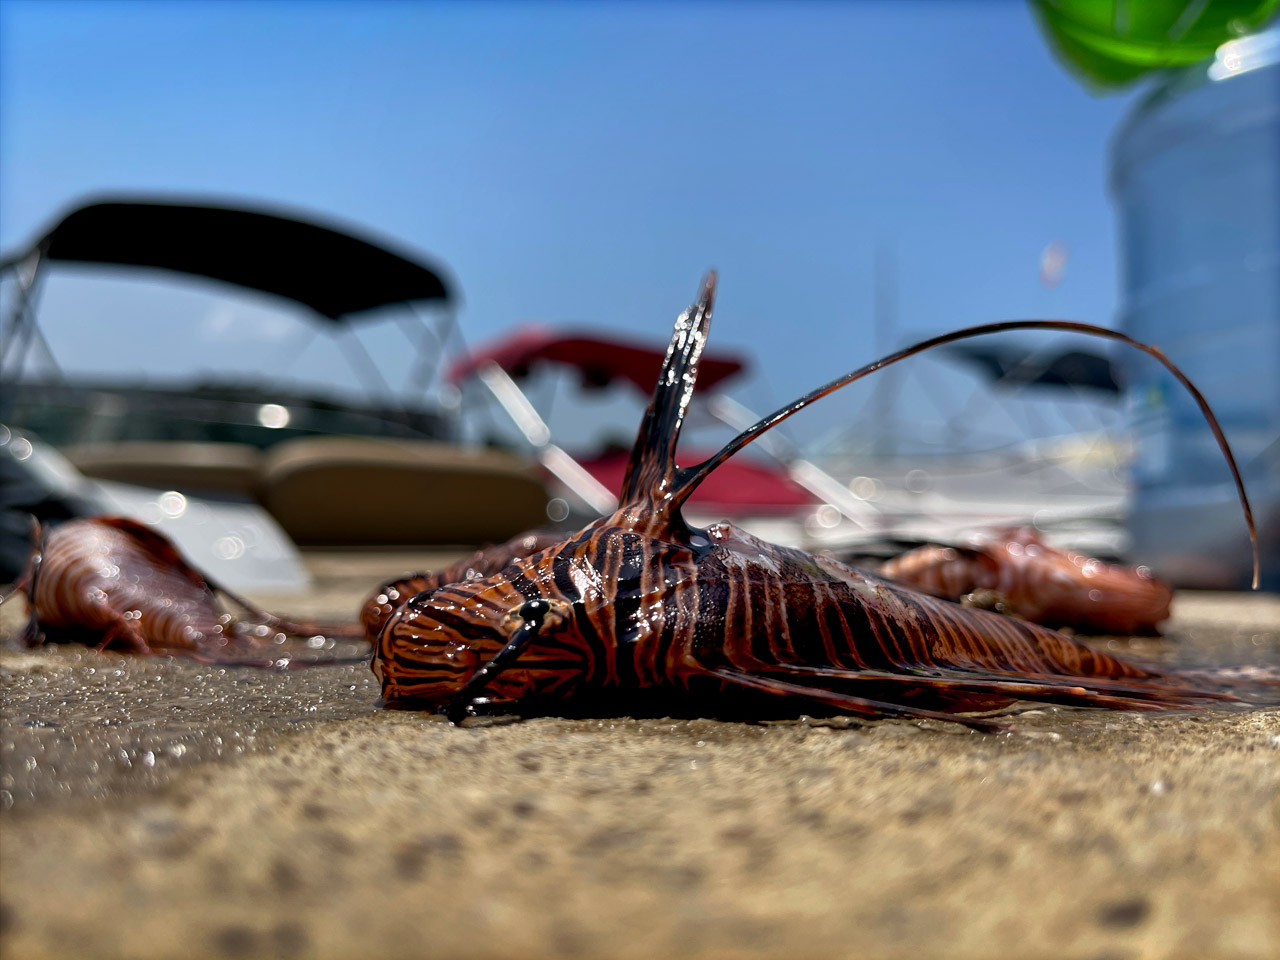 A lionfish just caught in Amchit harbour on the floor